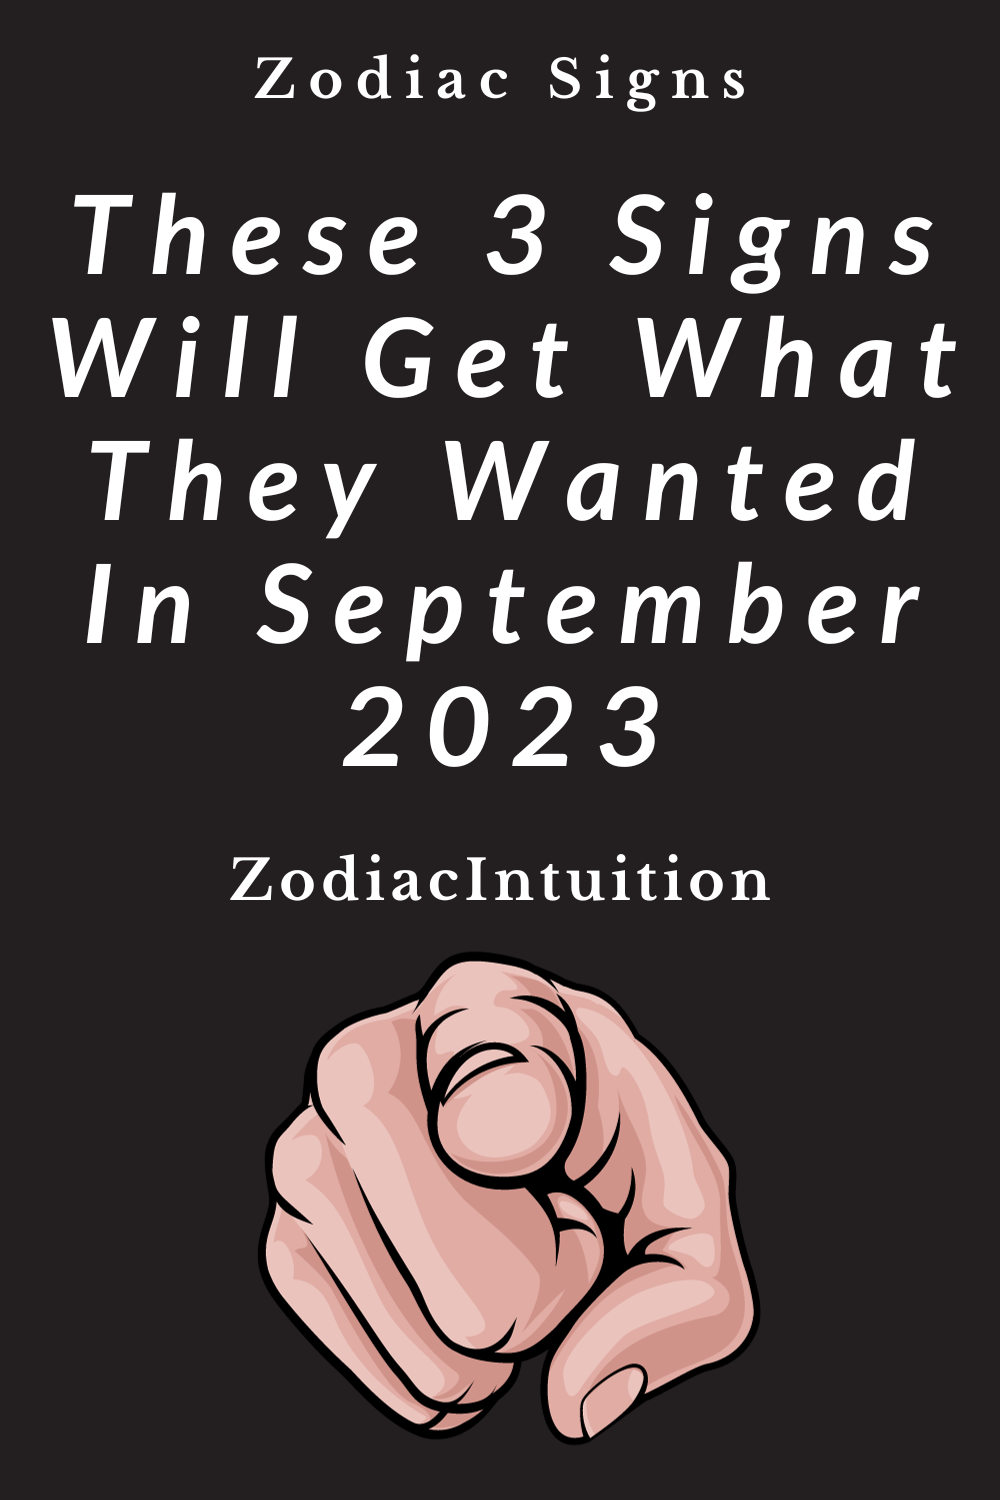 These 3 Signs Will Get What They Wanted In September 2023